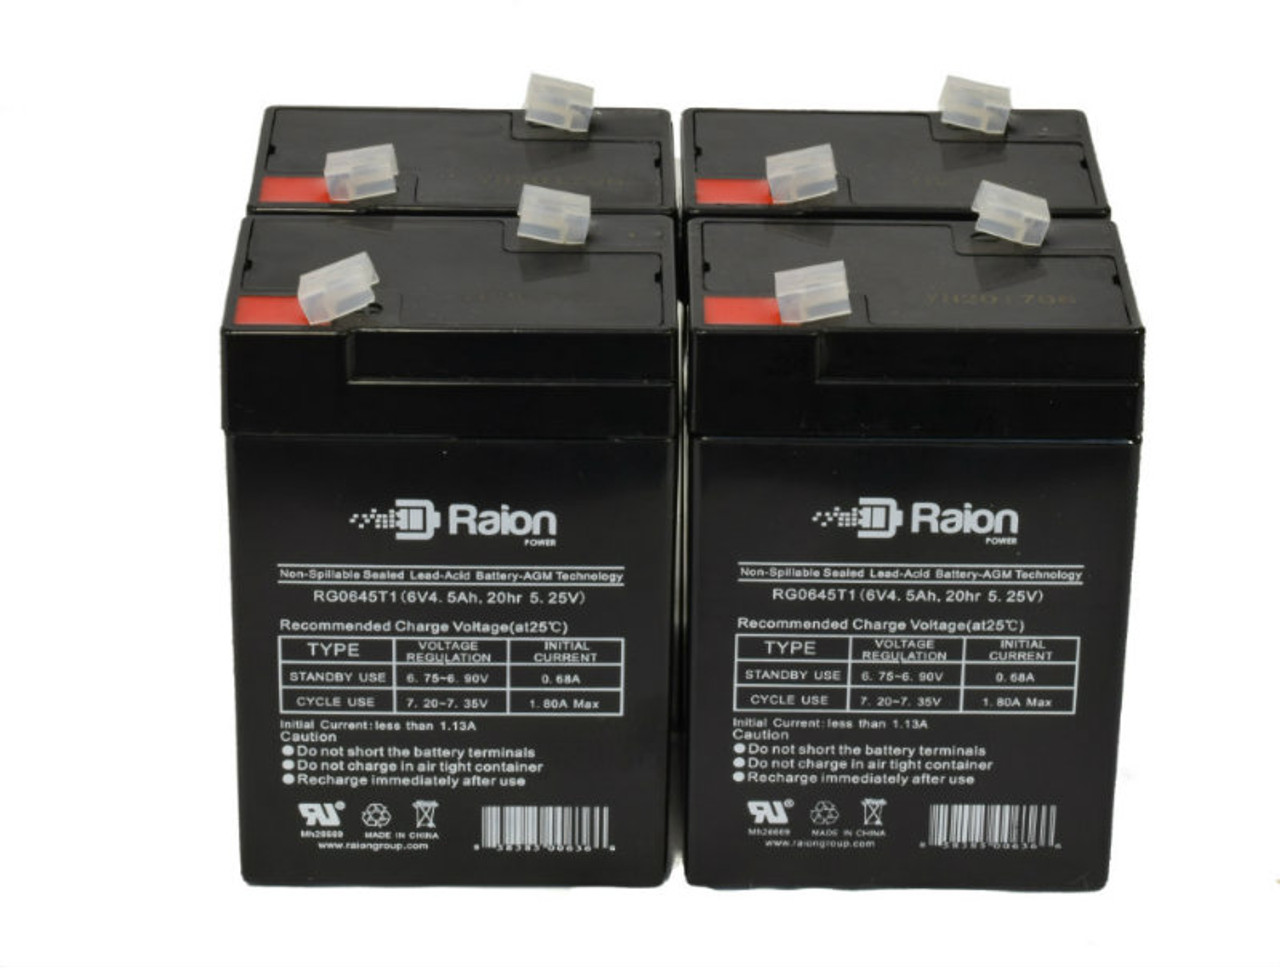 Raion Power RG0645T1 6V 4.5Ah Replacement Medical Equipment Battery for Mcgaw 2001 Intell Pump/Infusor - 4 Pack